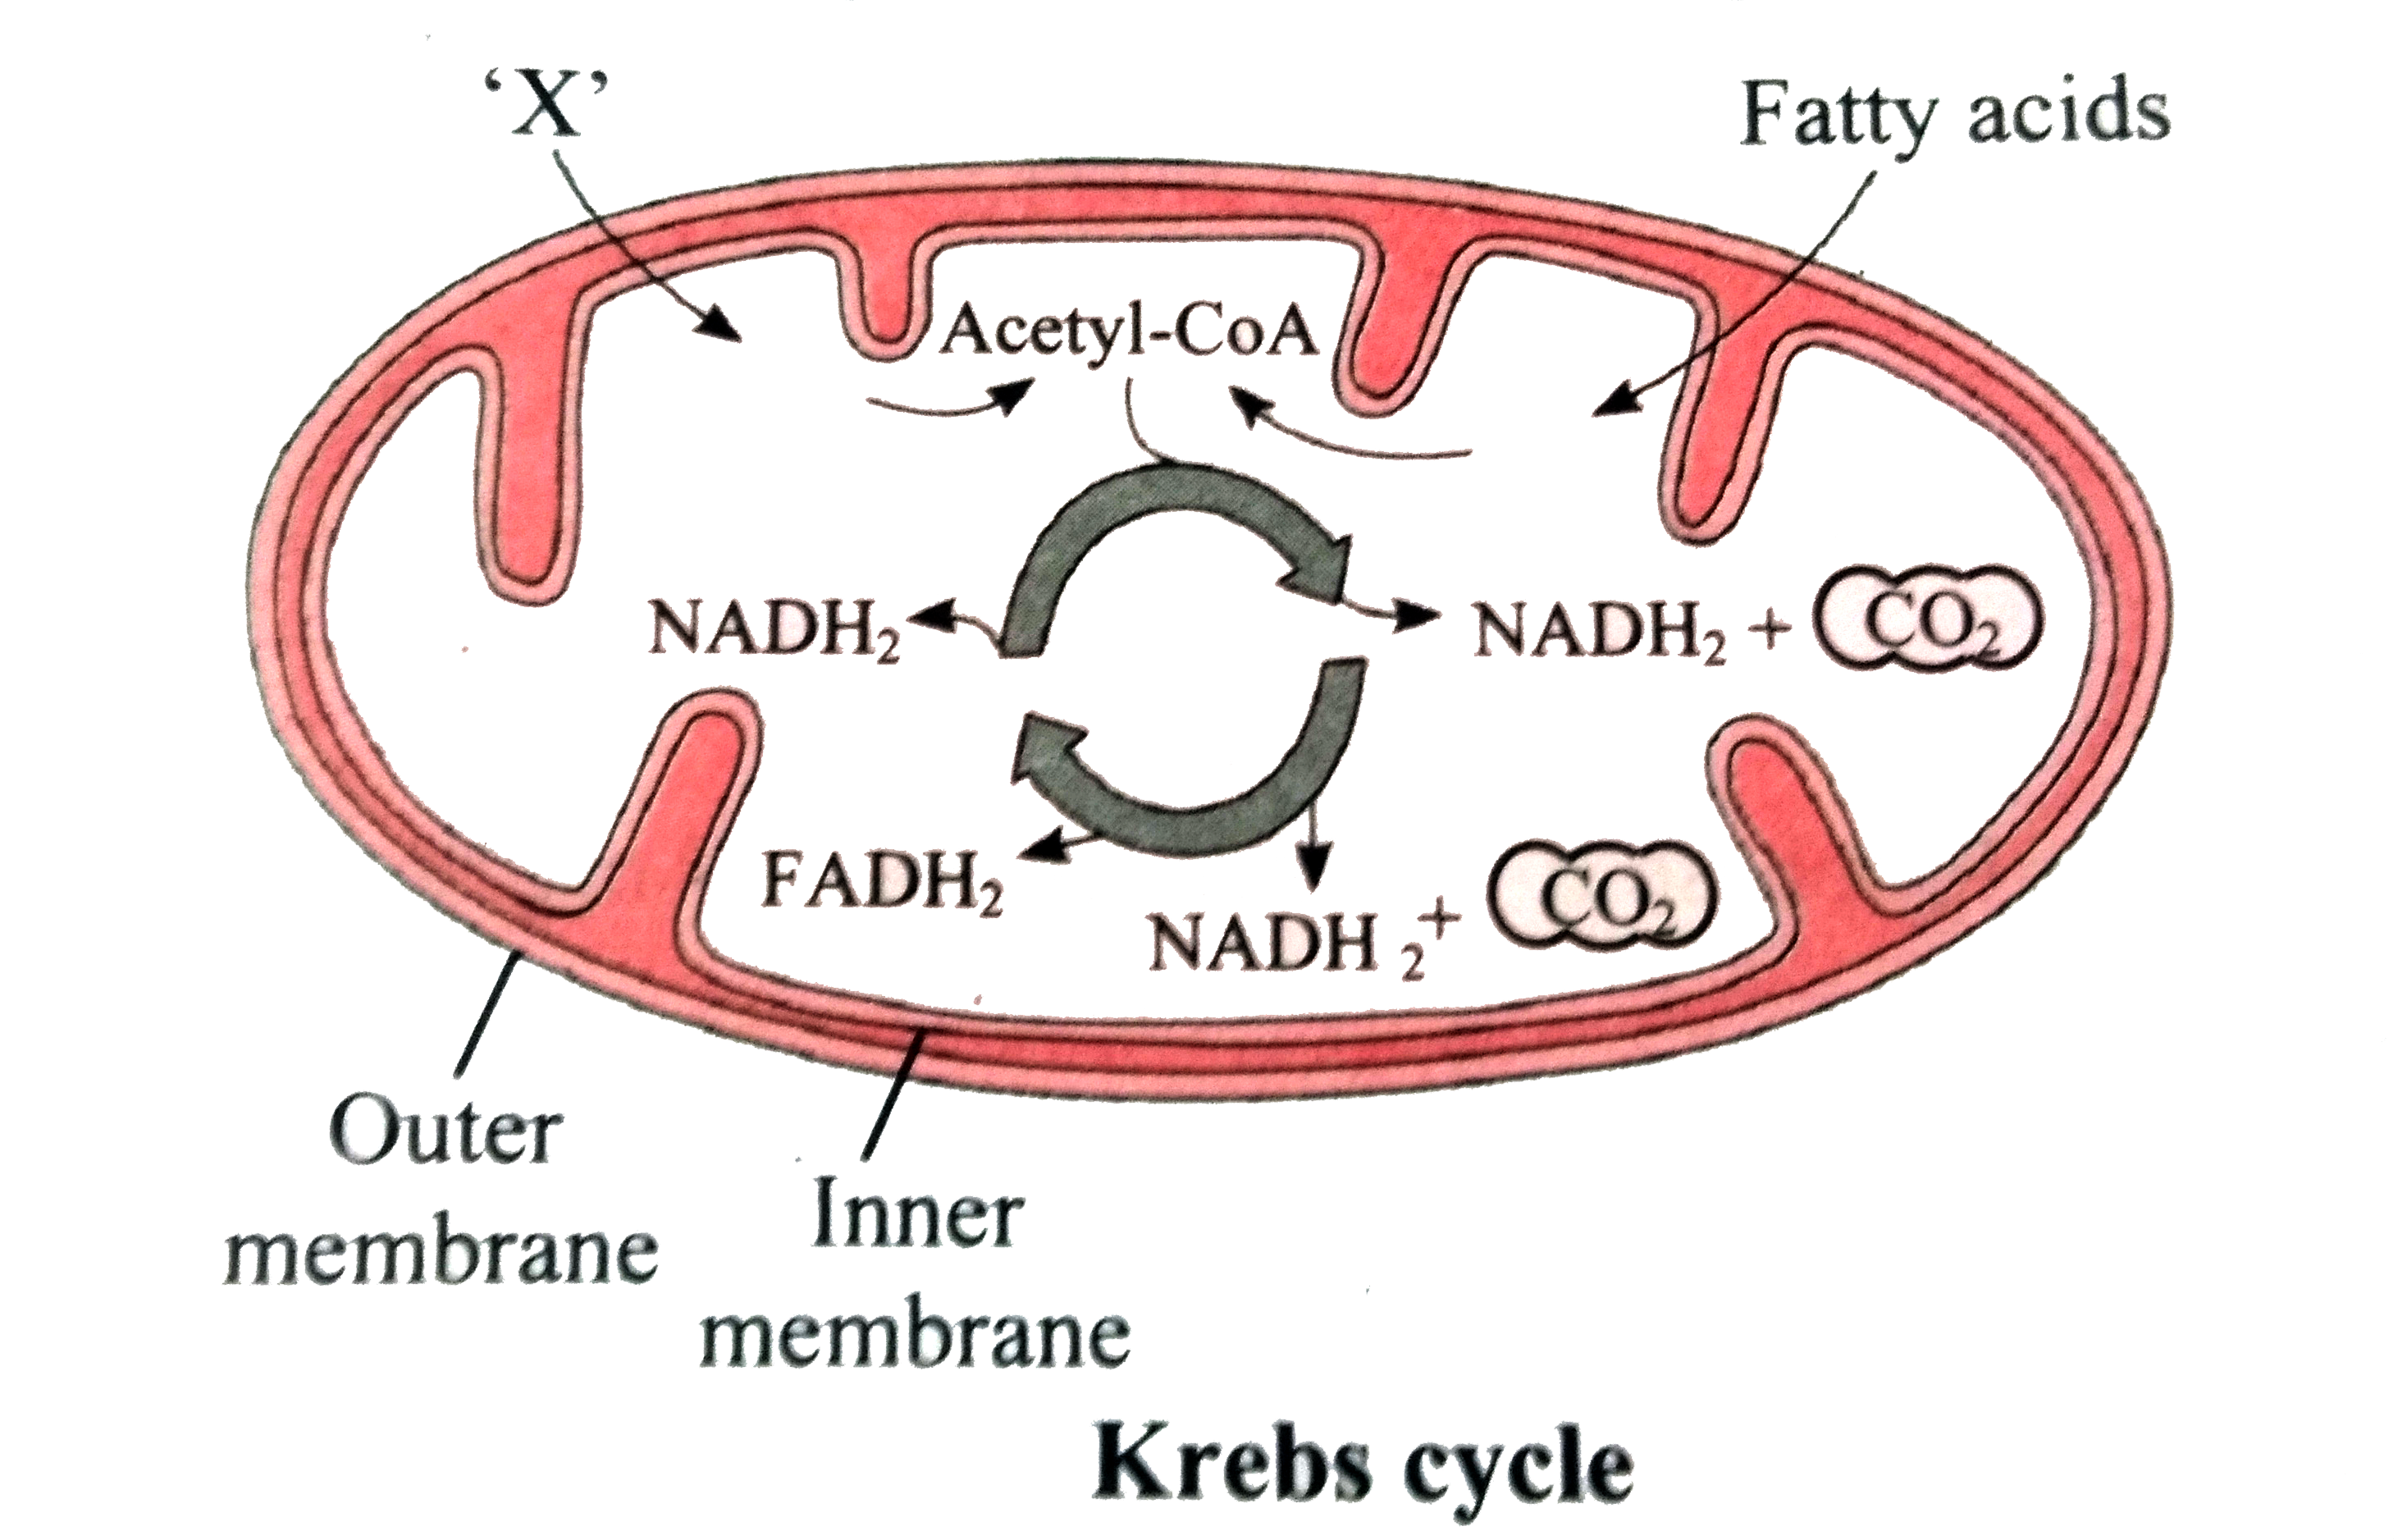 Observe the given diagram and answer the questions given below it.      a. Mention the cell organelle shown in the diagrams.   b. Which energy rich molecules are synthesized during Krebs cycle ?    c. Identify the compound 'X'  which is a product of glycolysis that is utilised in Krebs cycle.